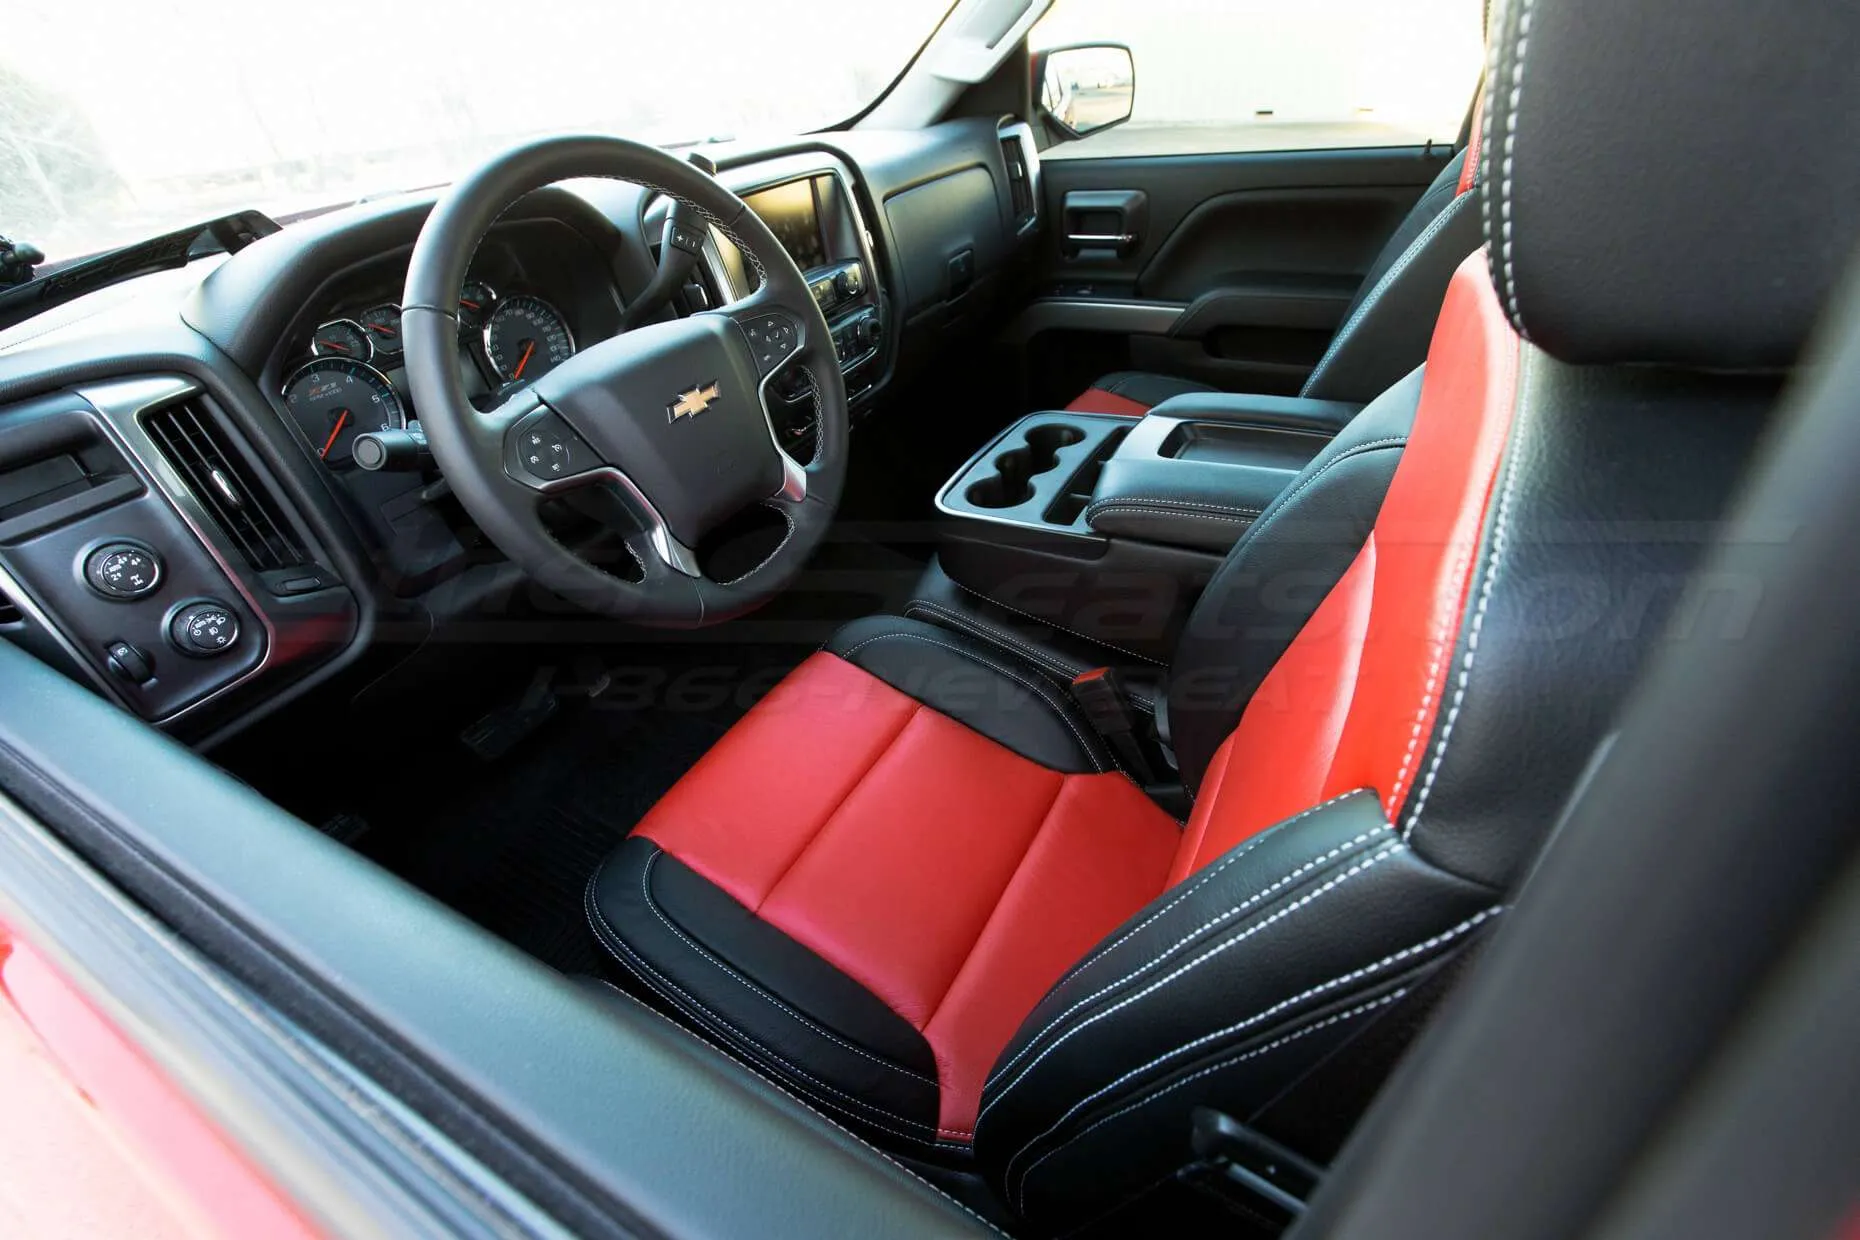 GMC Sierra leather upholstery kit - Black and Bright Red - Installed - Drivers seat, headrest down view